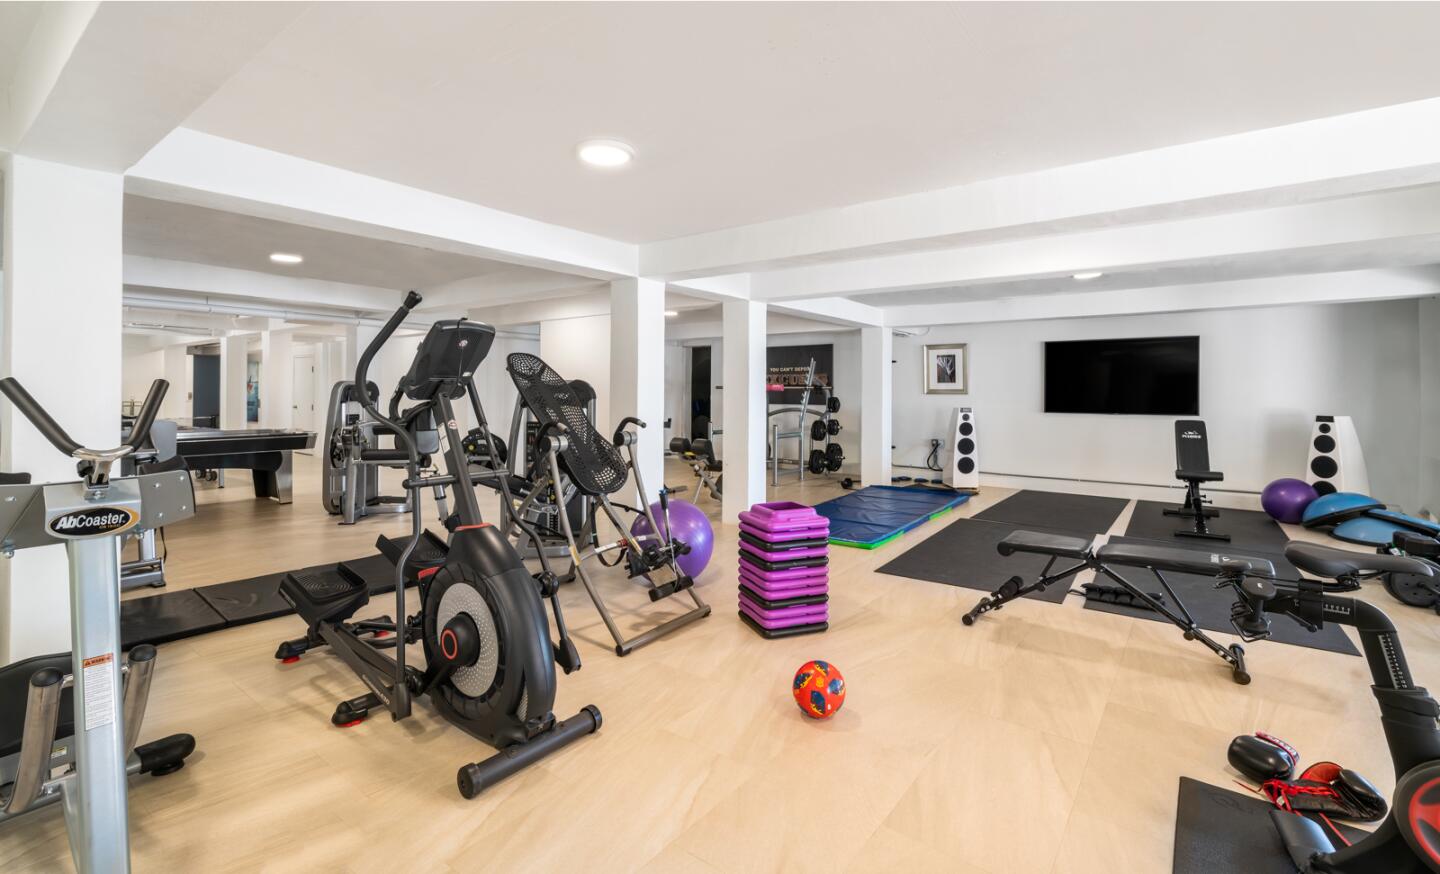 A workout room is spacious with mirrored walls.